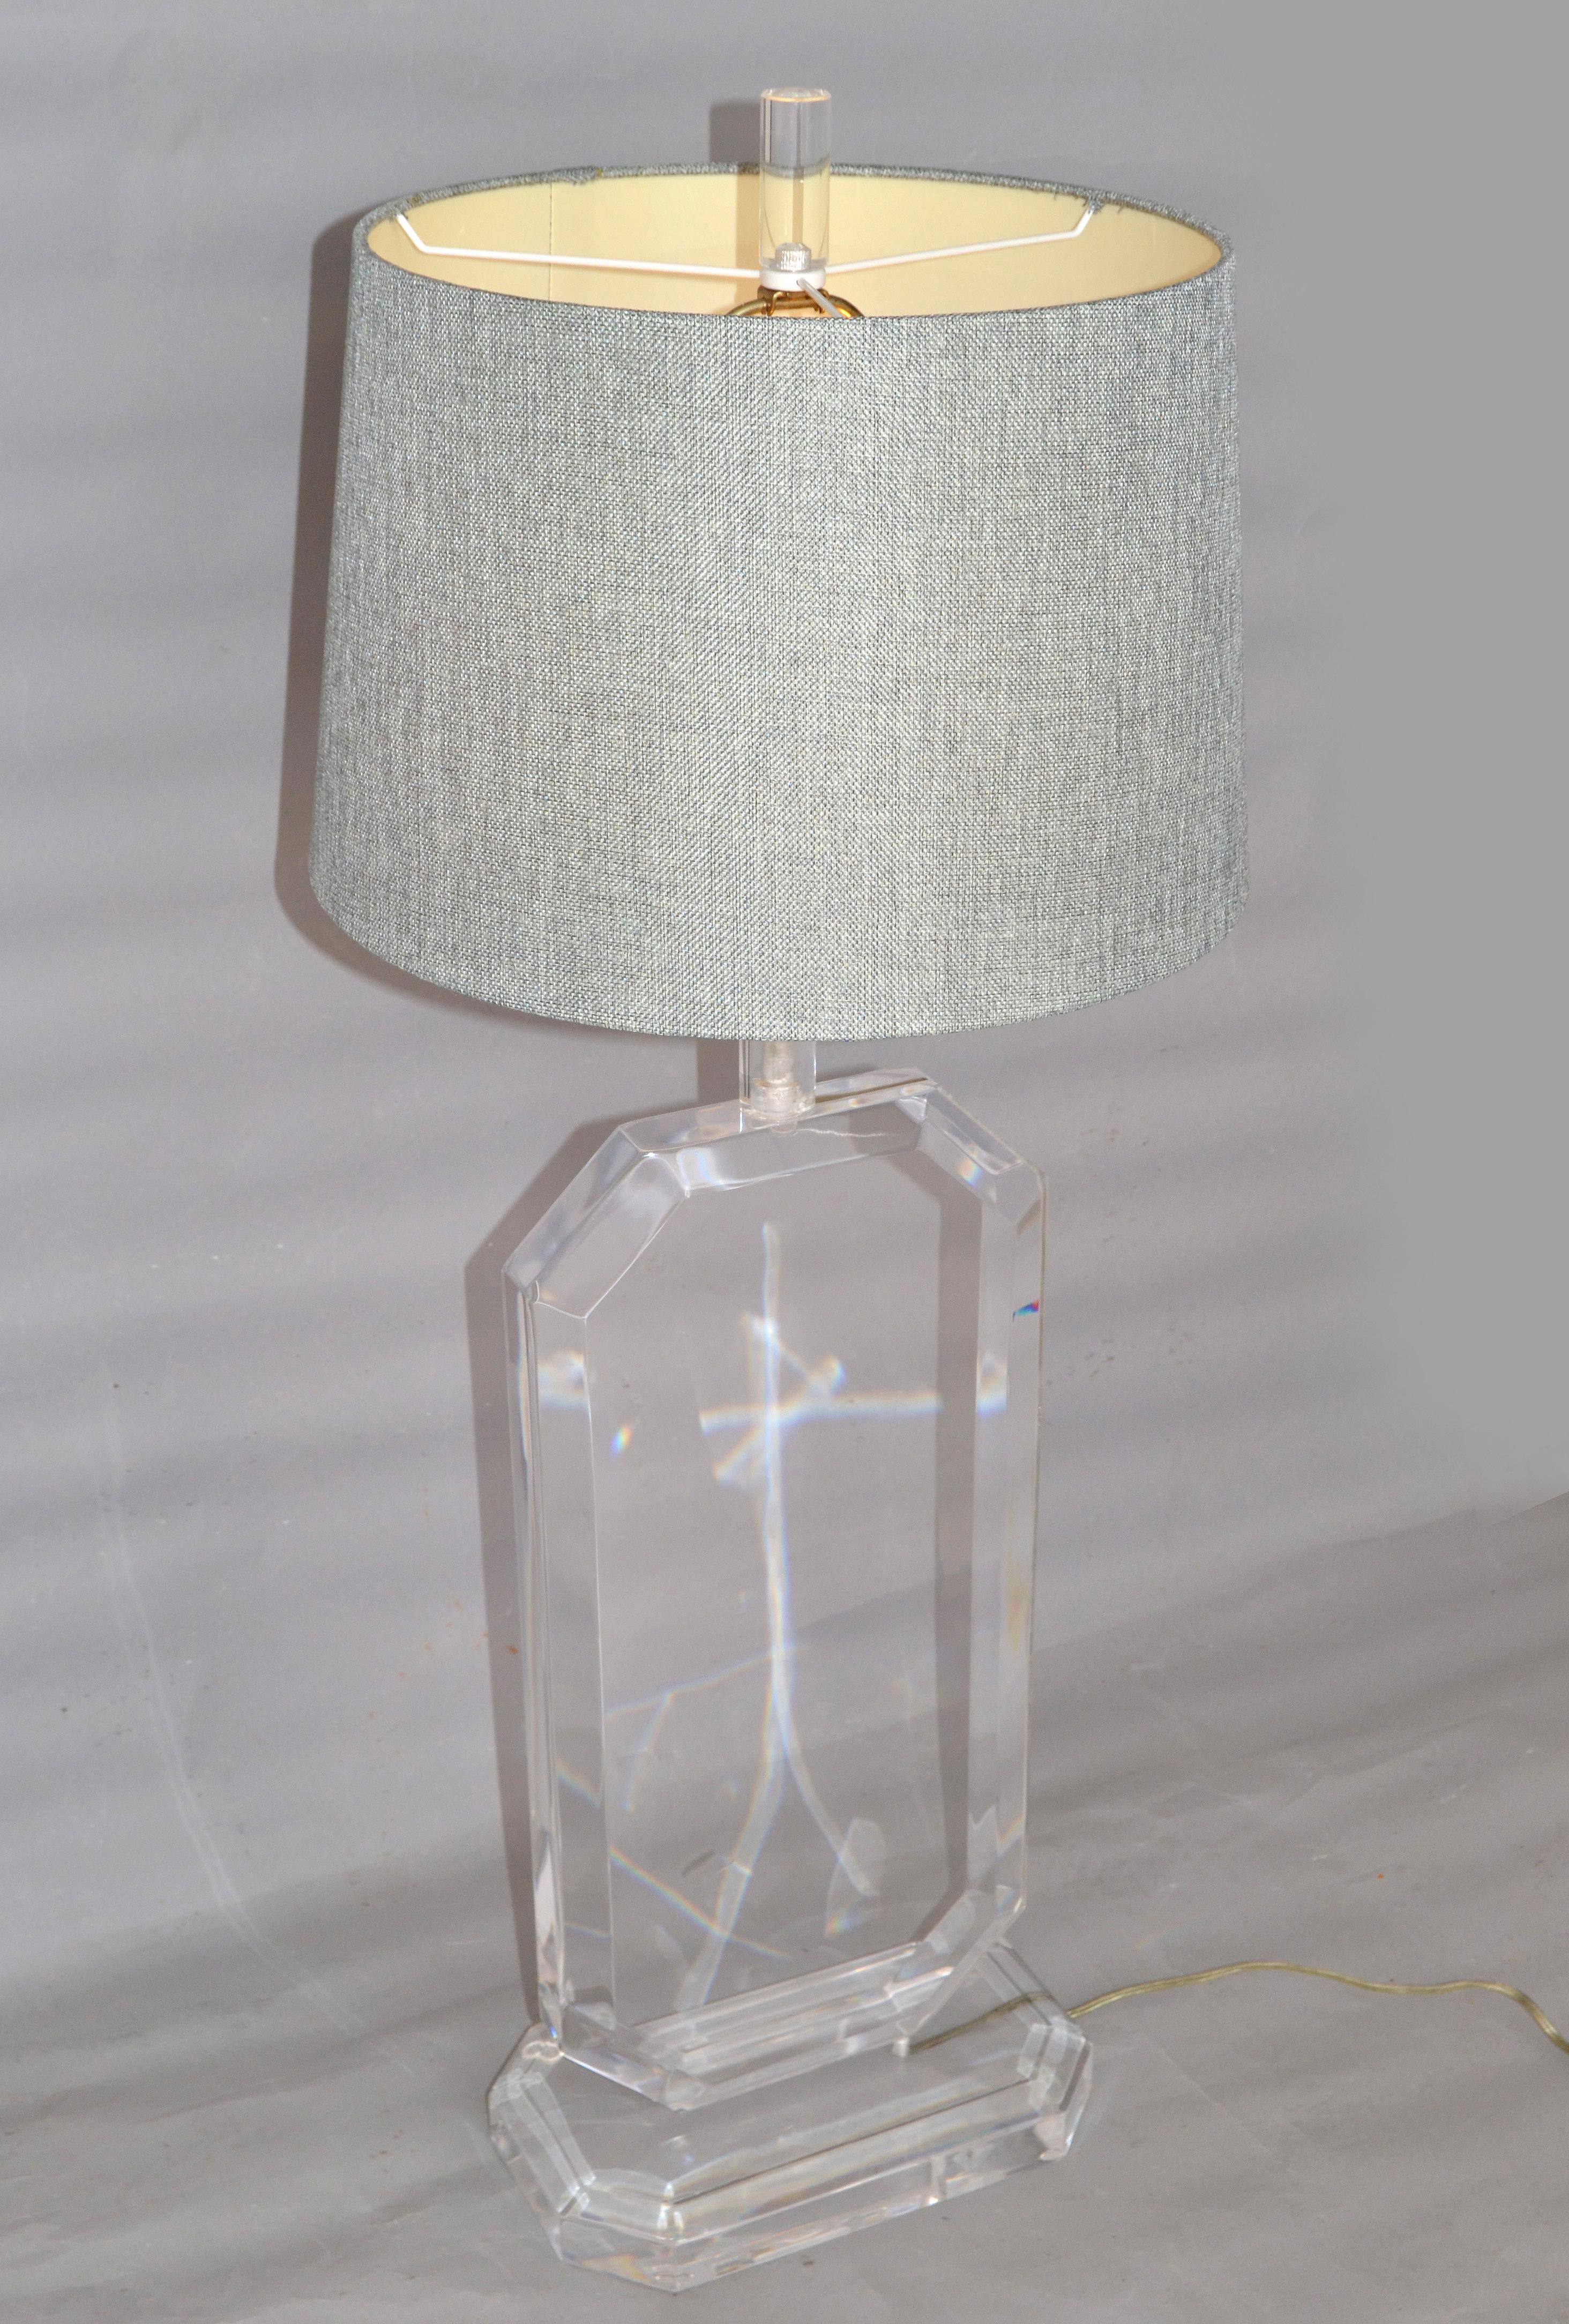 American Massive Mid-Century Modern Flat Beveled Lucite Table Lamp For Sale